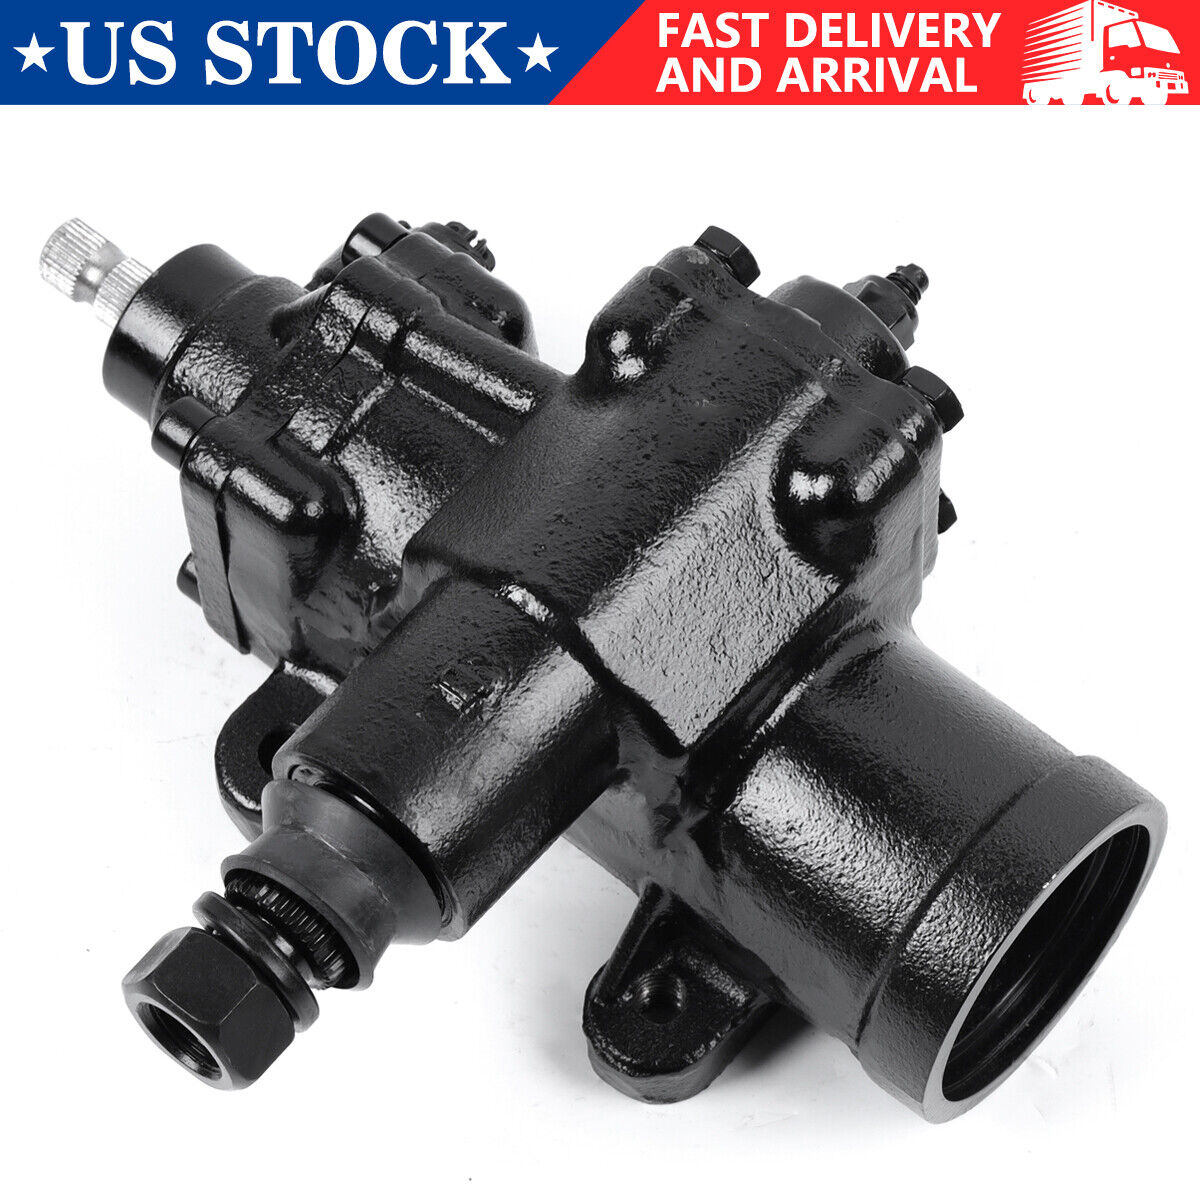 New Power Steering Gear Box for Dodge Ram 1500 2500 3500 2005 2006 2007 2008 4WD